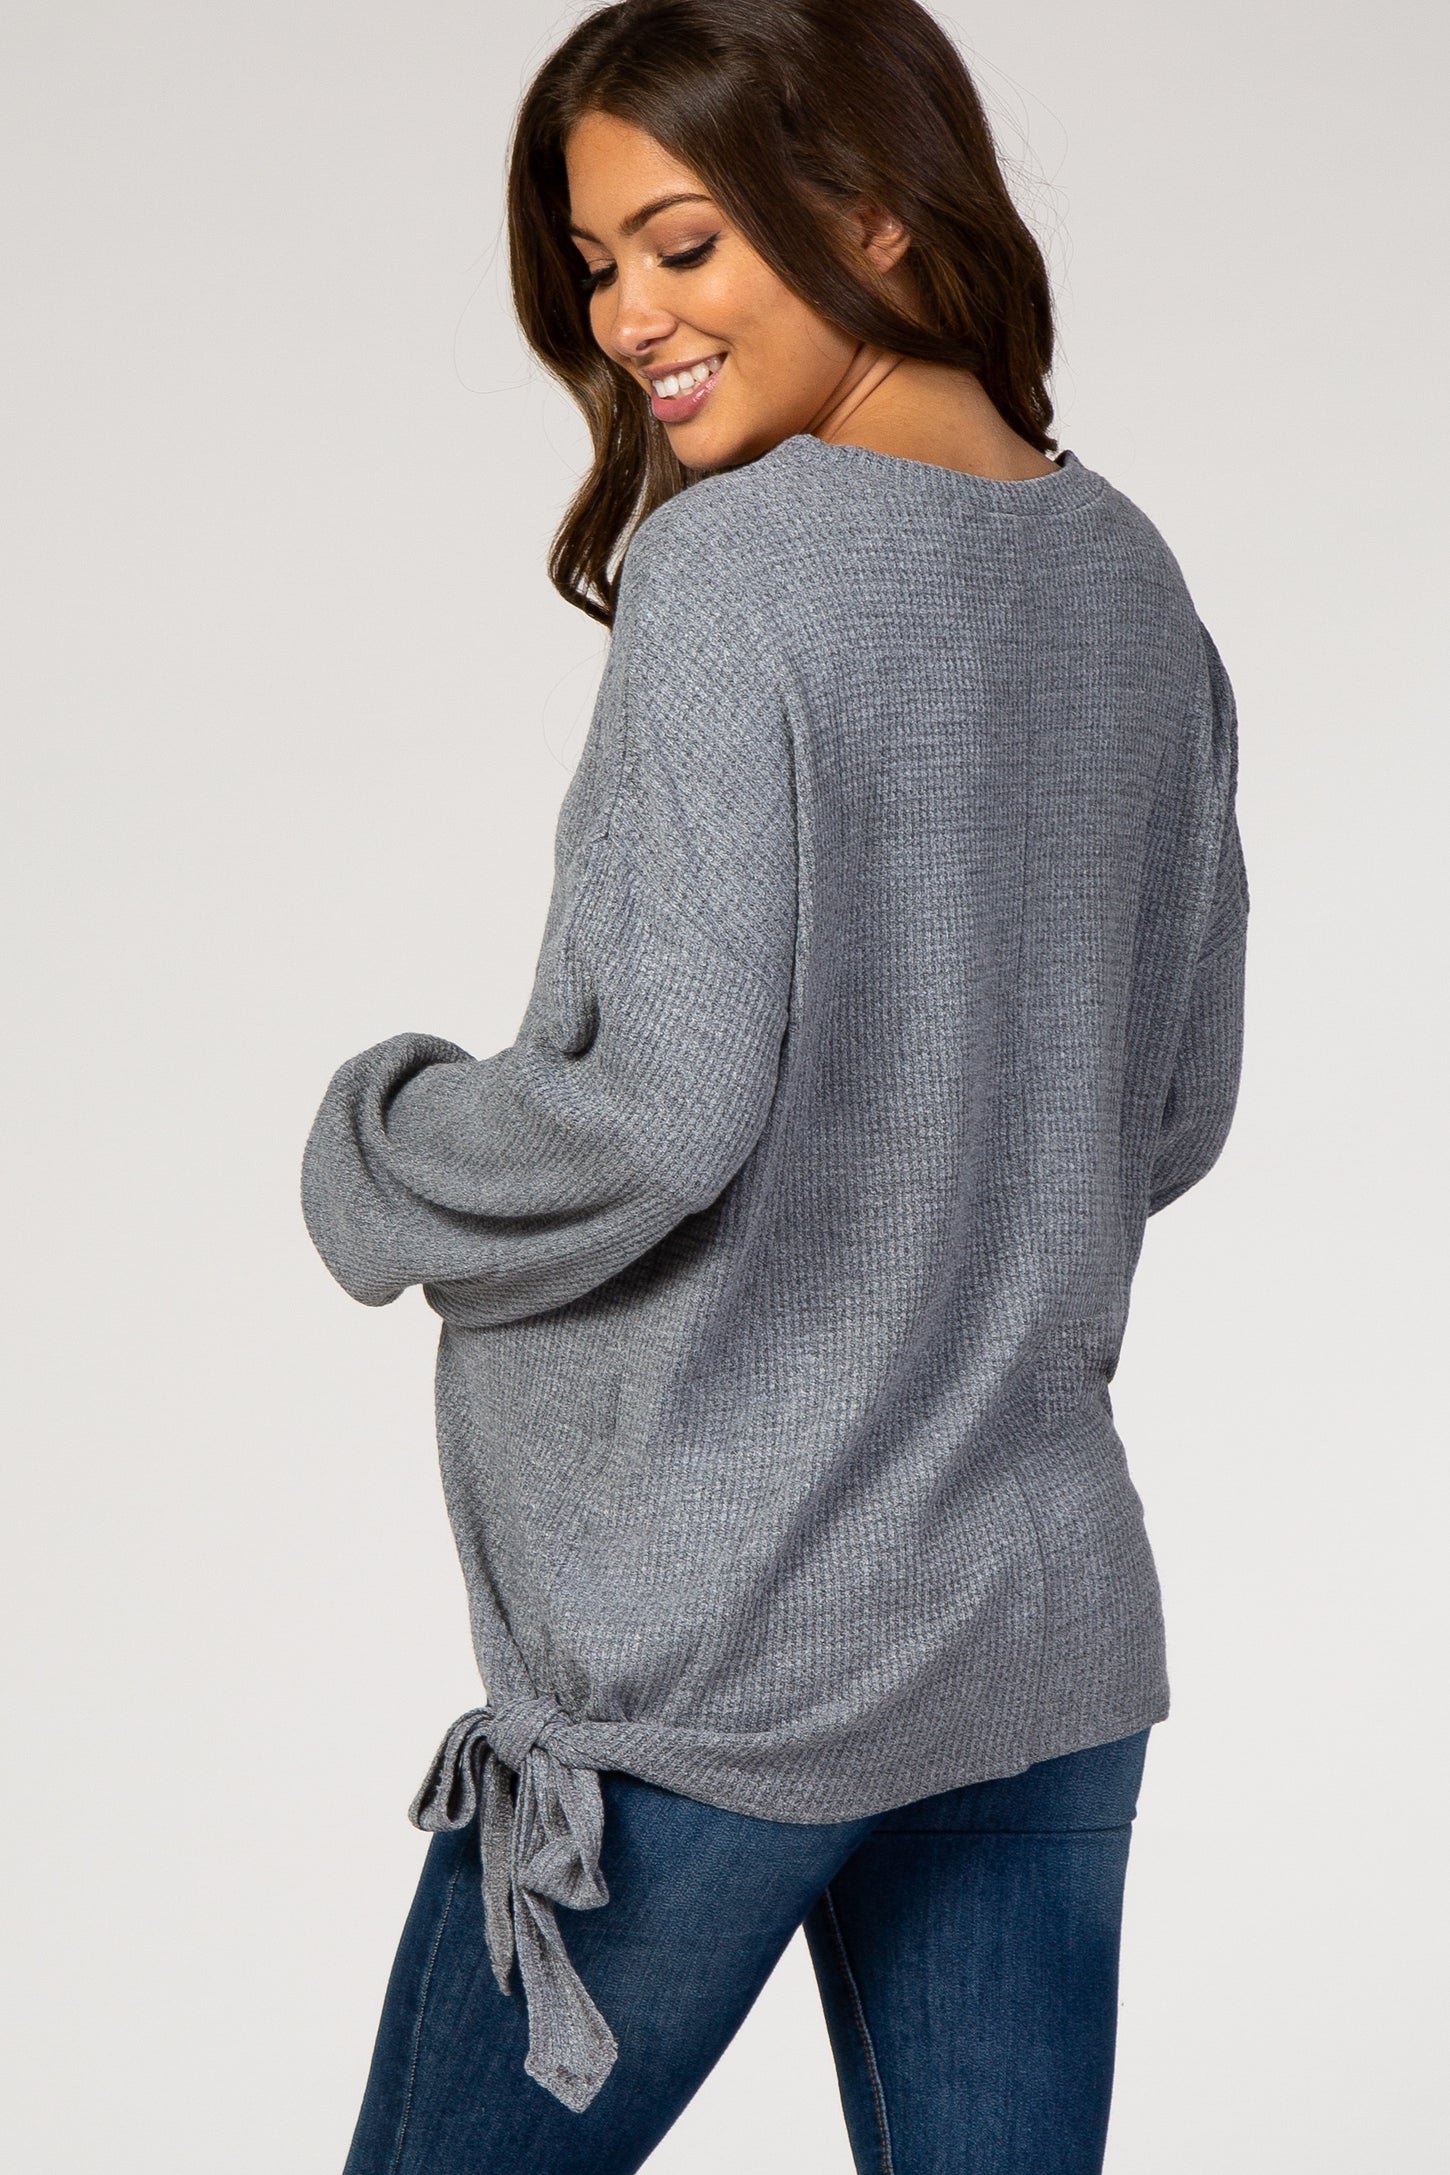 Charcoal Ribbed Side Tie Bubble Long Sleeve Maternity Top